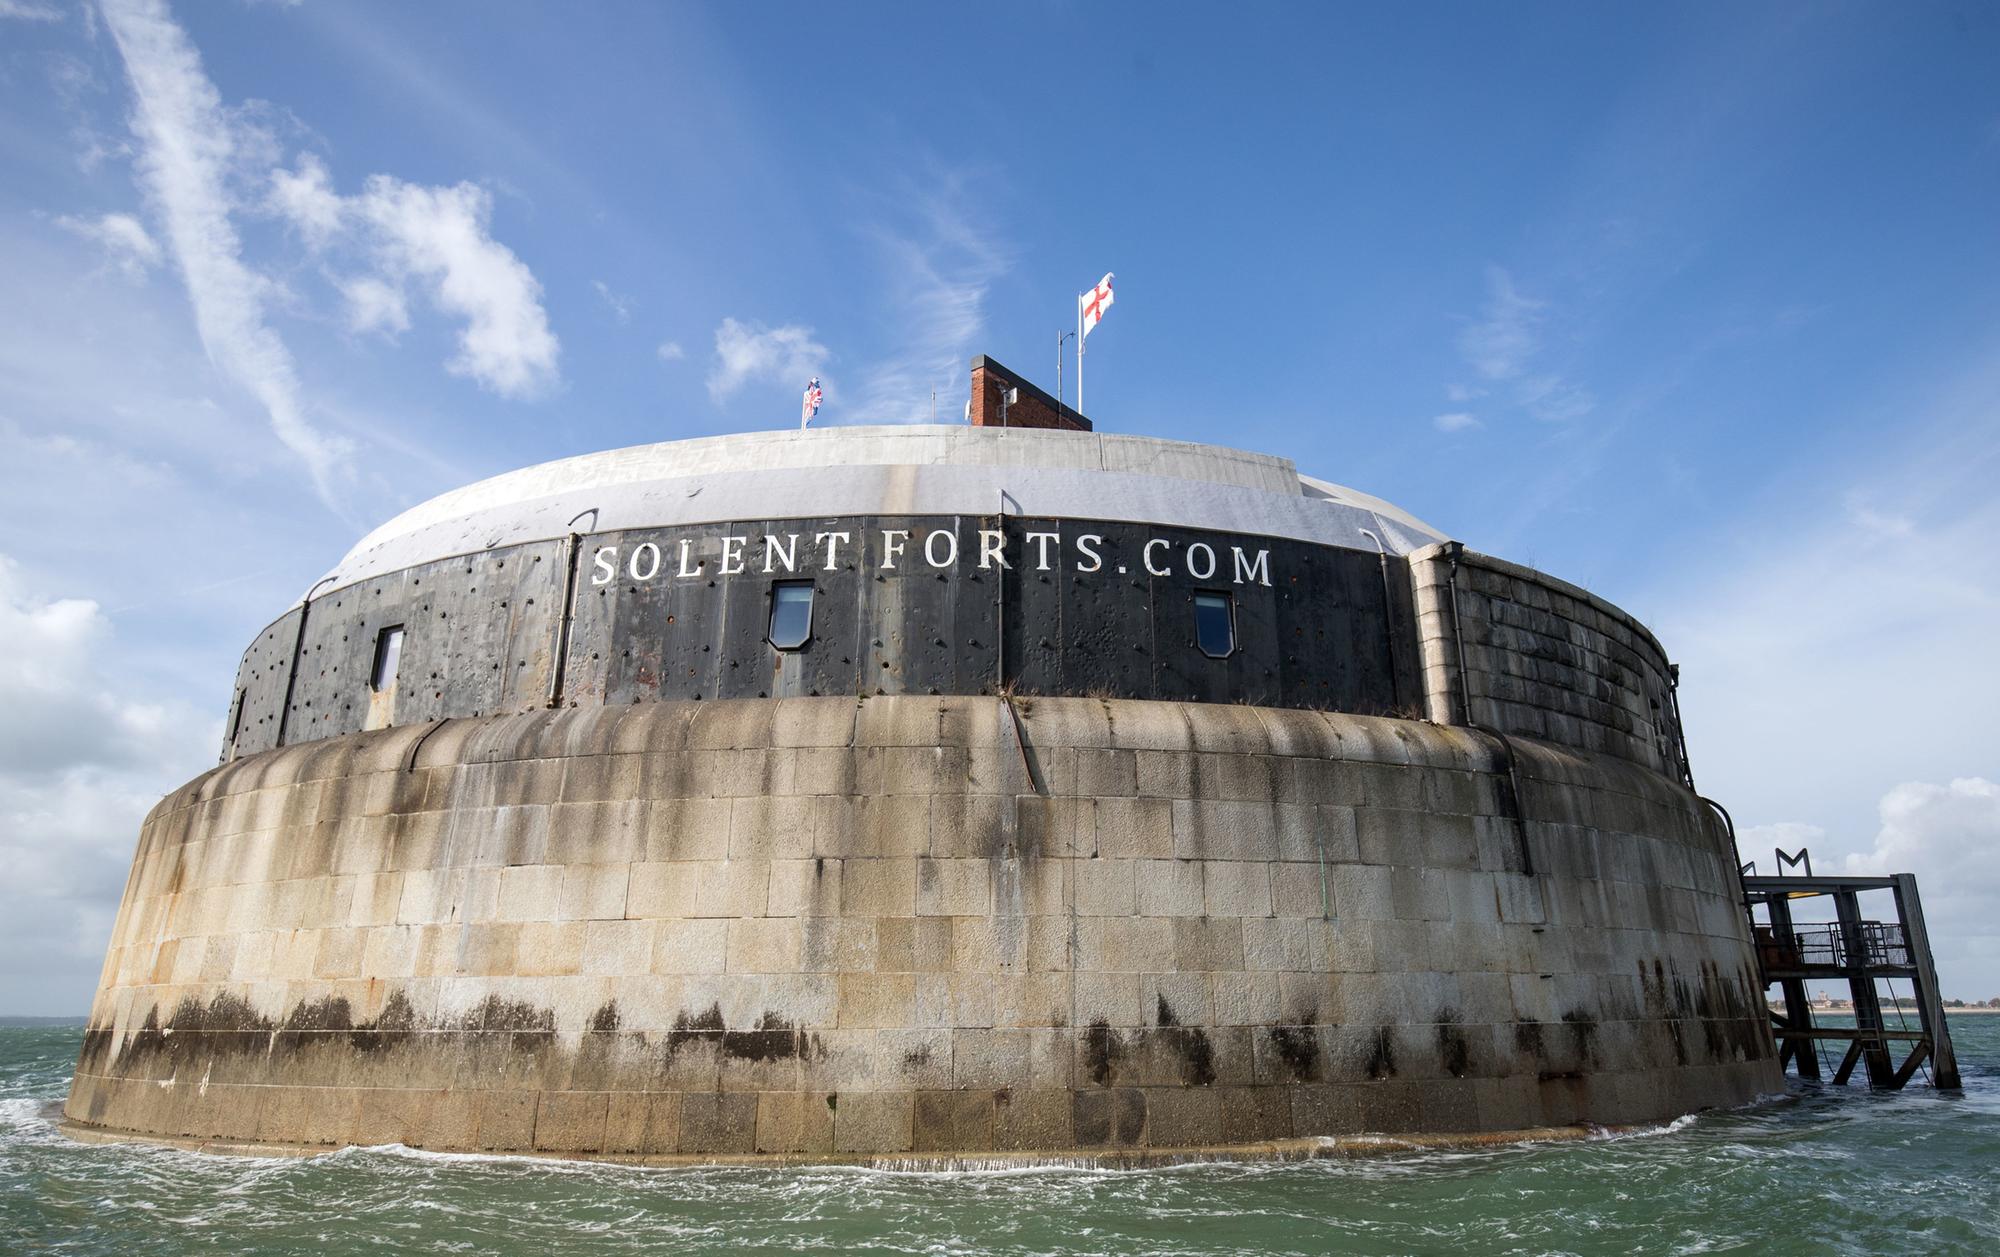 Inside The Solent Forts Which Have 23 Bedrooms Pubs Spa And Even A